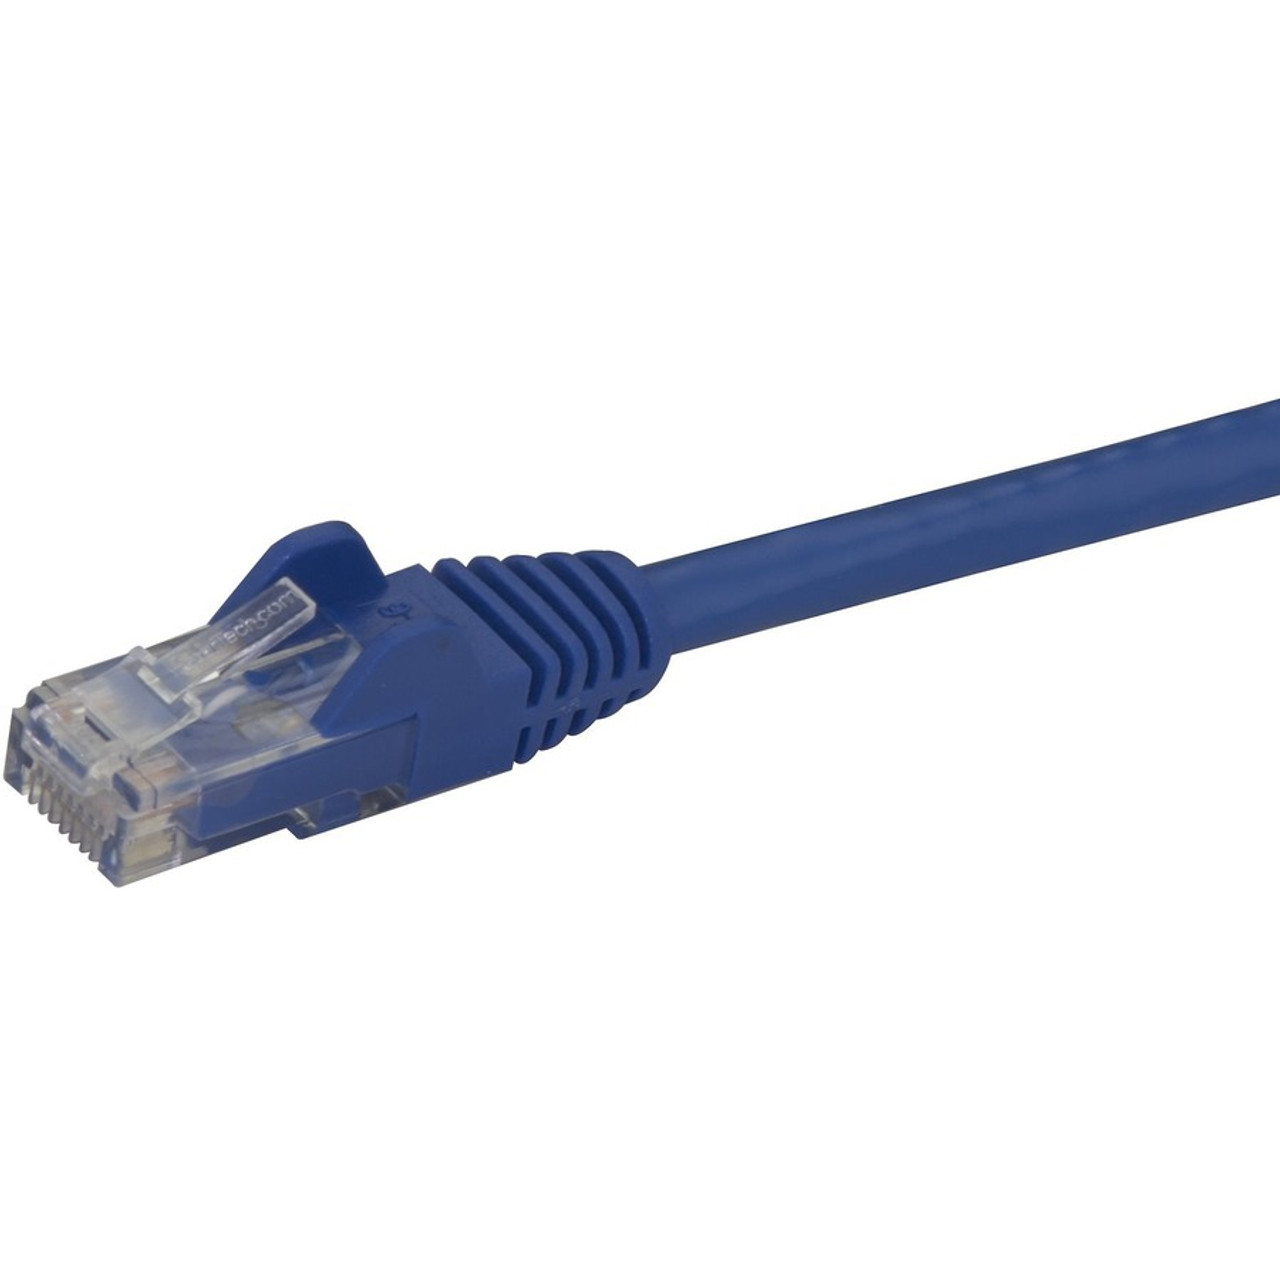 StarTech.com Cat6 Ethernet Cable - 1 ft - Blue - Patch Cable - Molded Cat6  Cable - Short Network Cable - Ethernet Cord - Cat 6 Cable - 1ft 